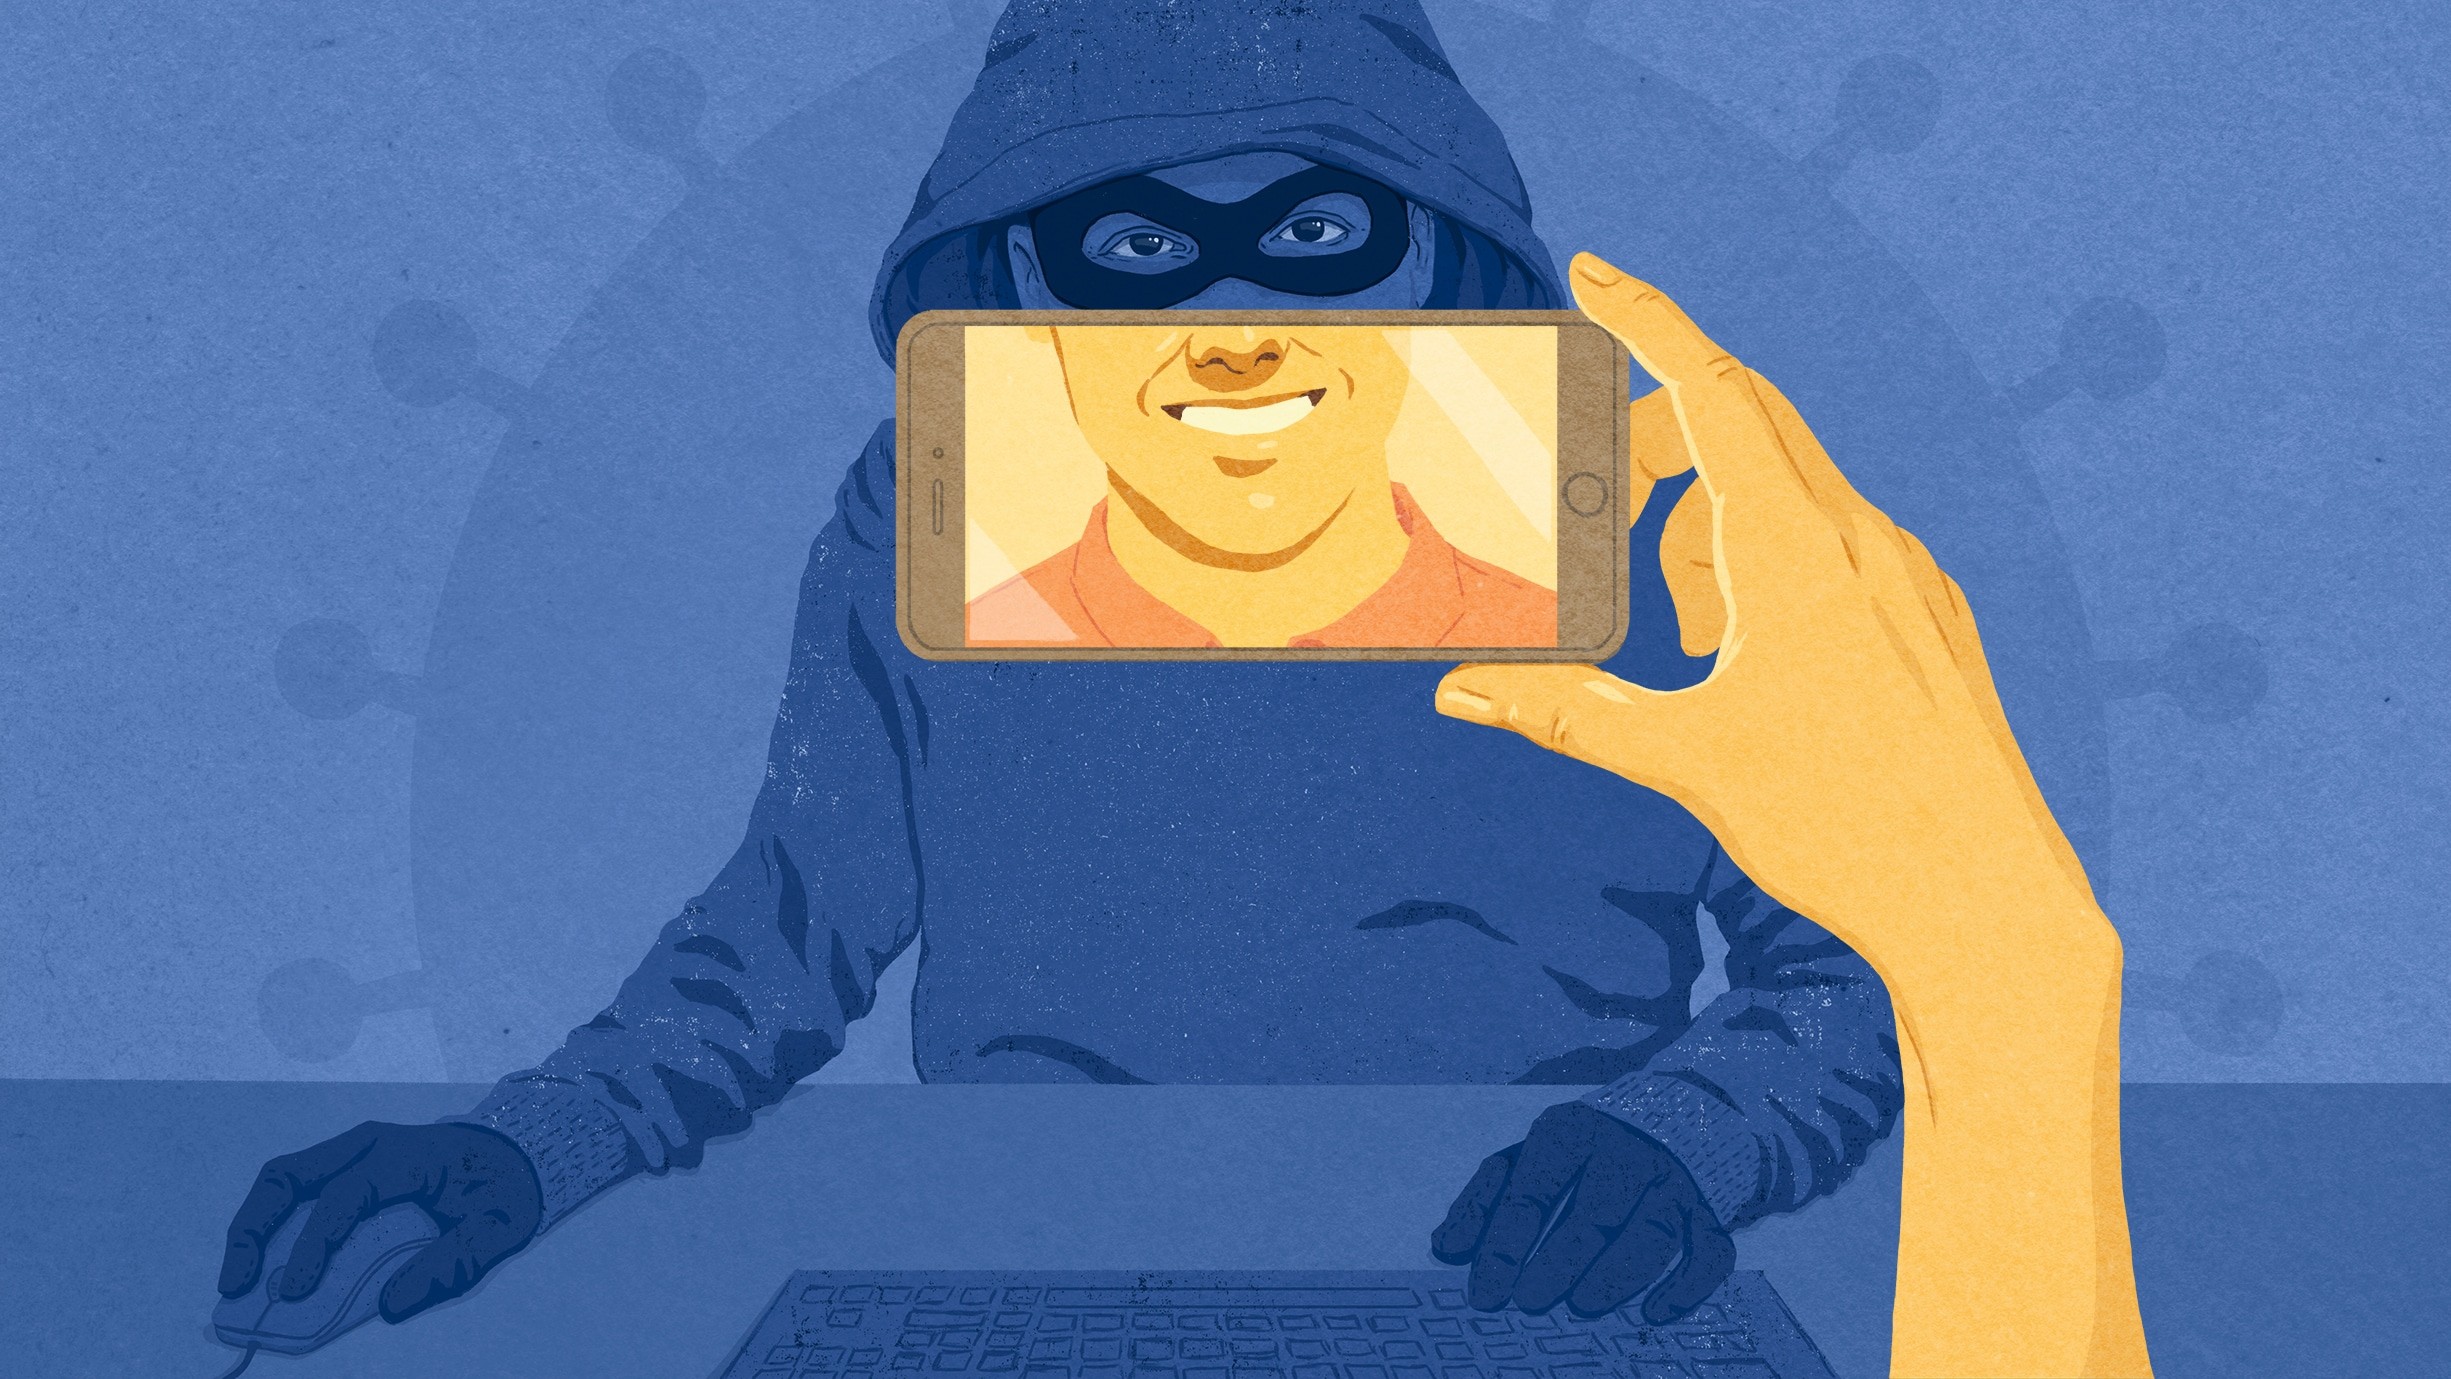 illustration of hooded man with a phone display with a smile placed over his mouth